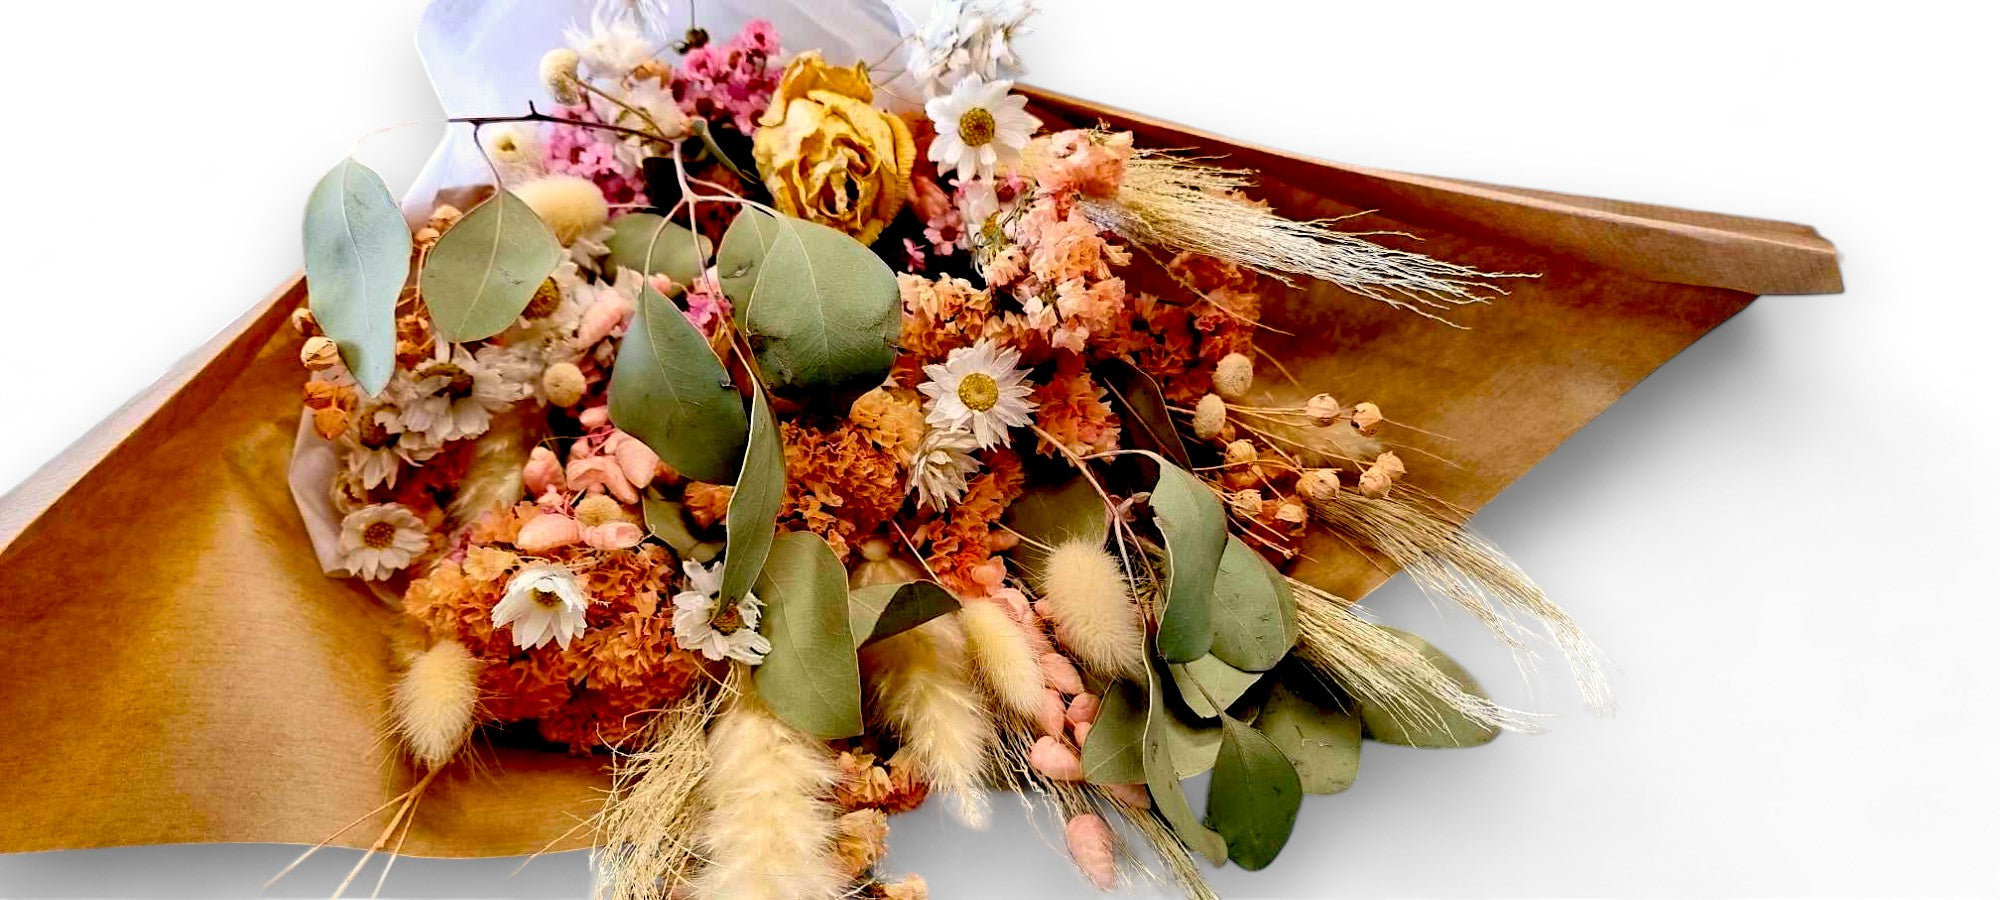 Dried Bouquet in a vase